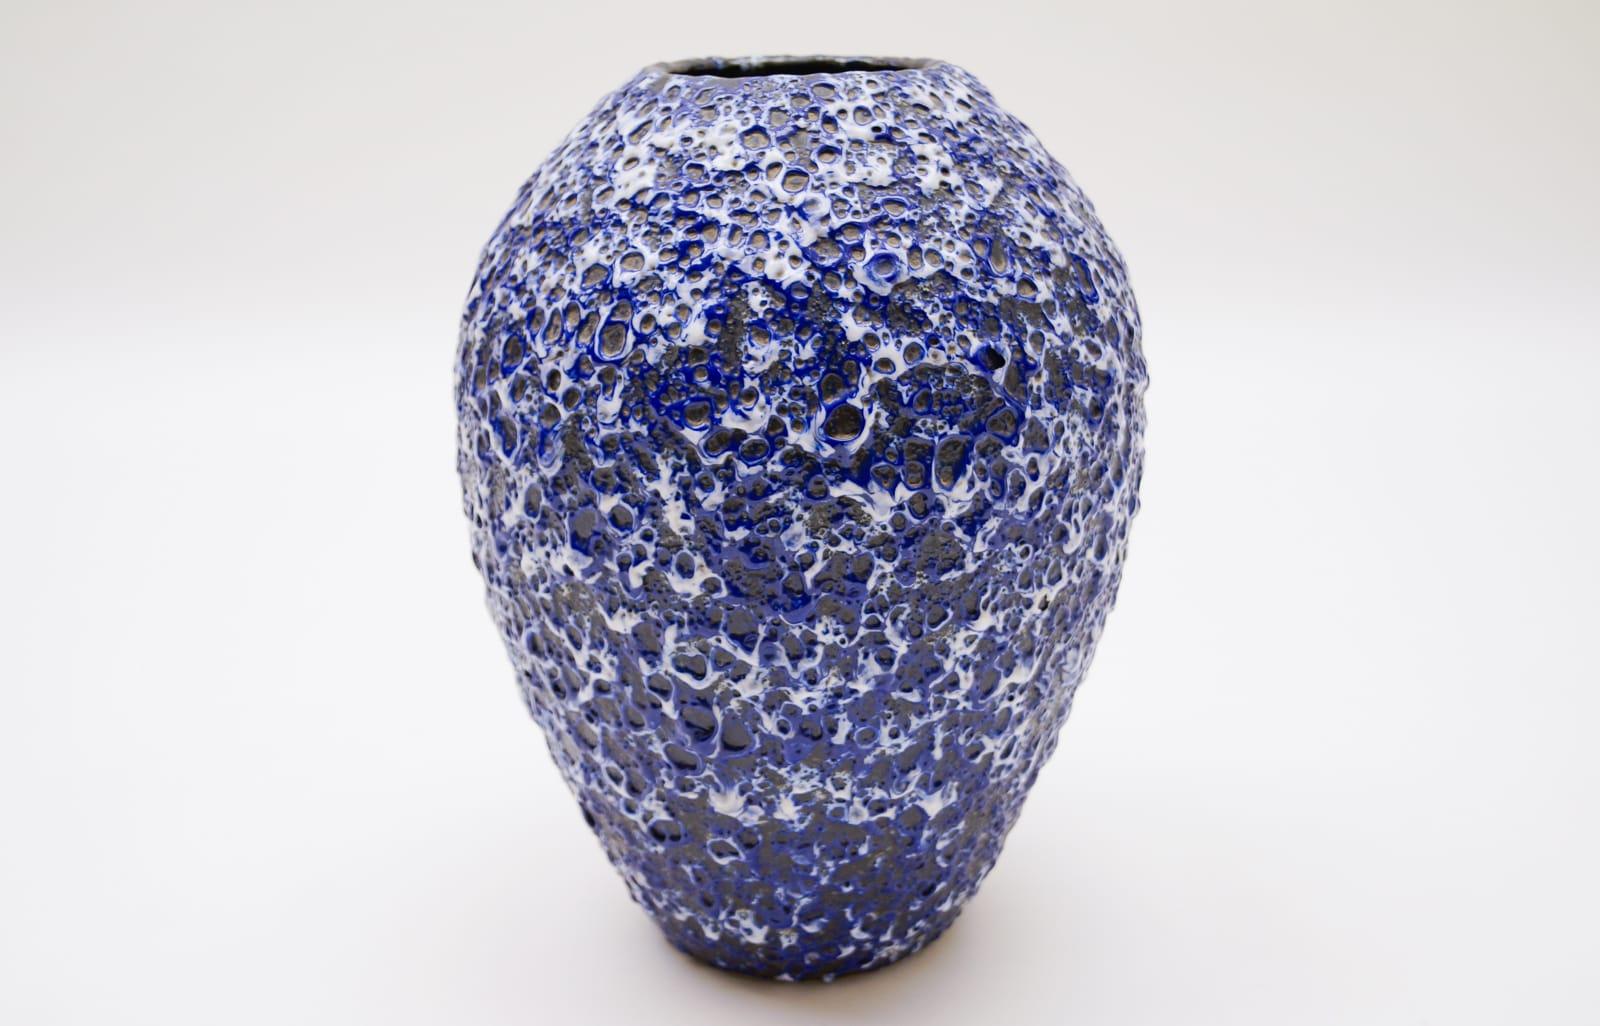 Very rare awesome huge blue and white fat lava vase by ES Keramik, Germany, 1950s

Very good condition.